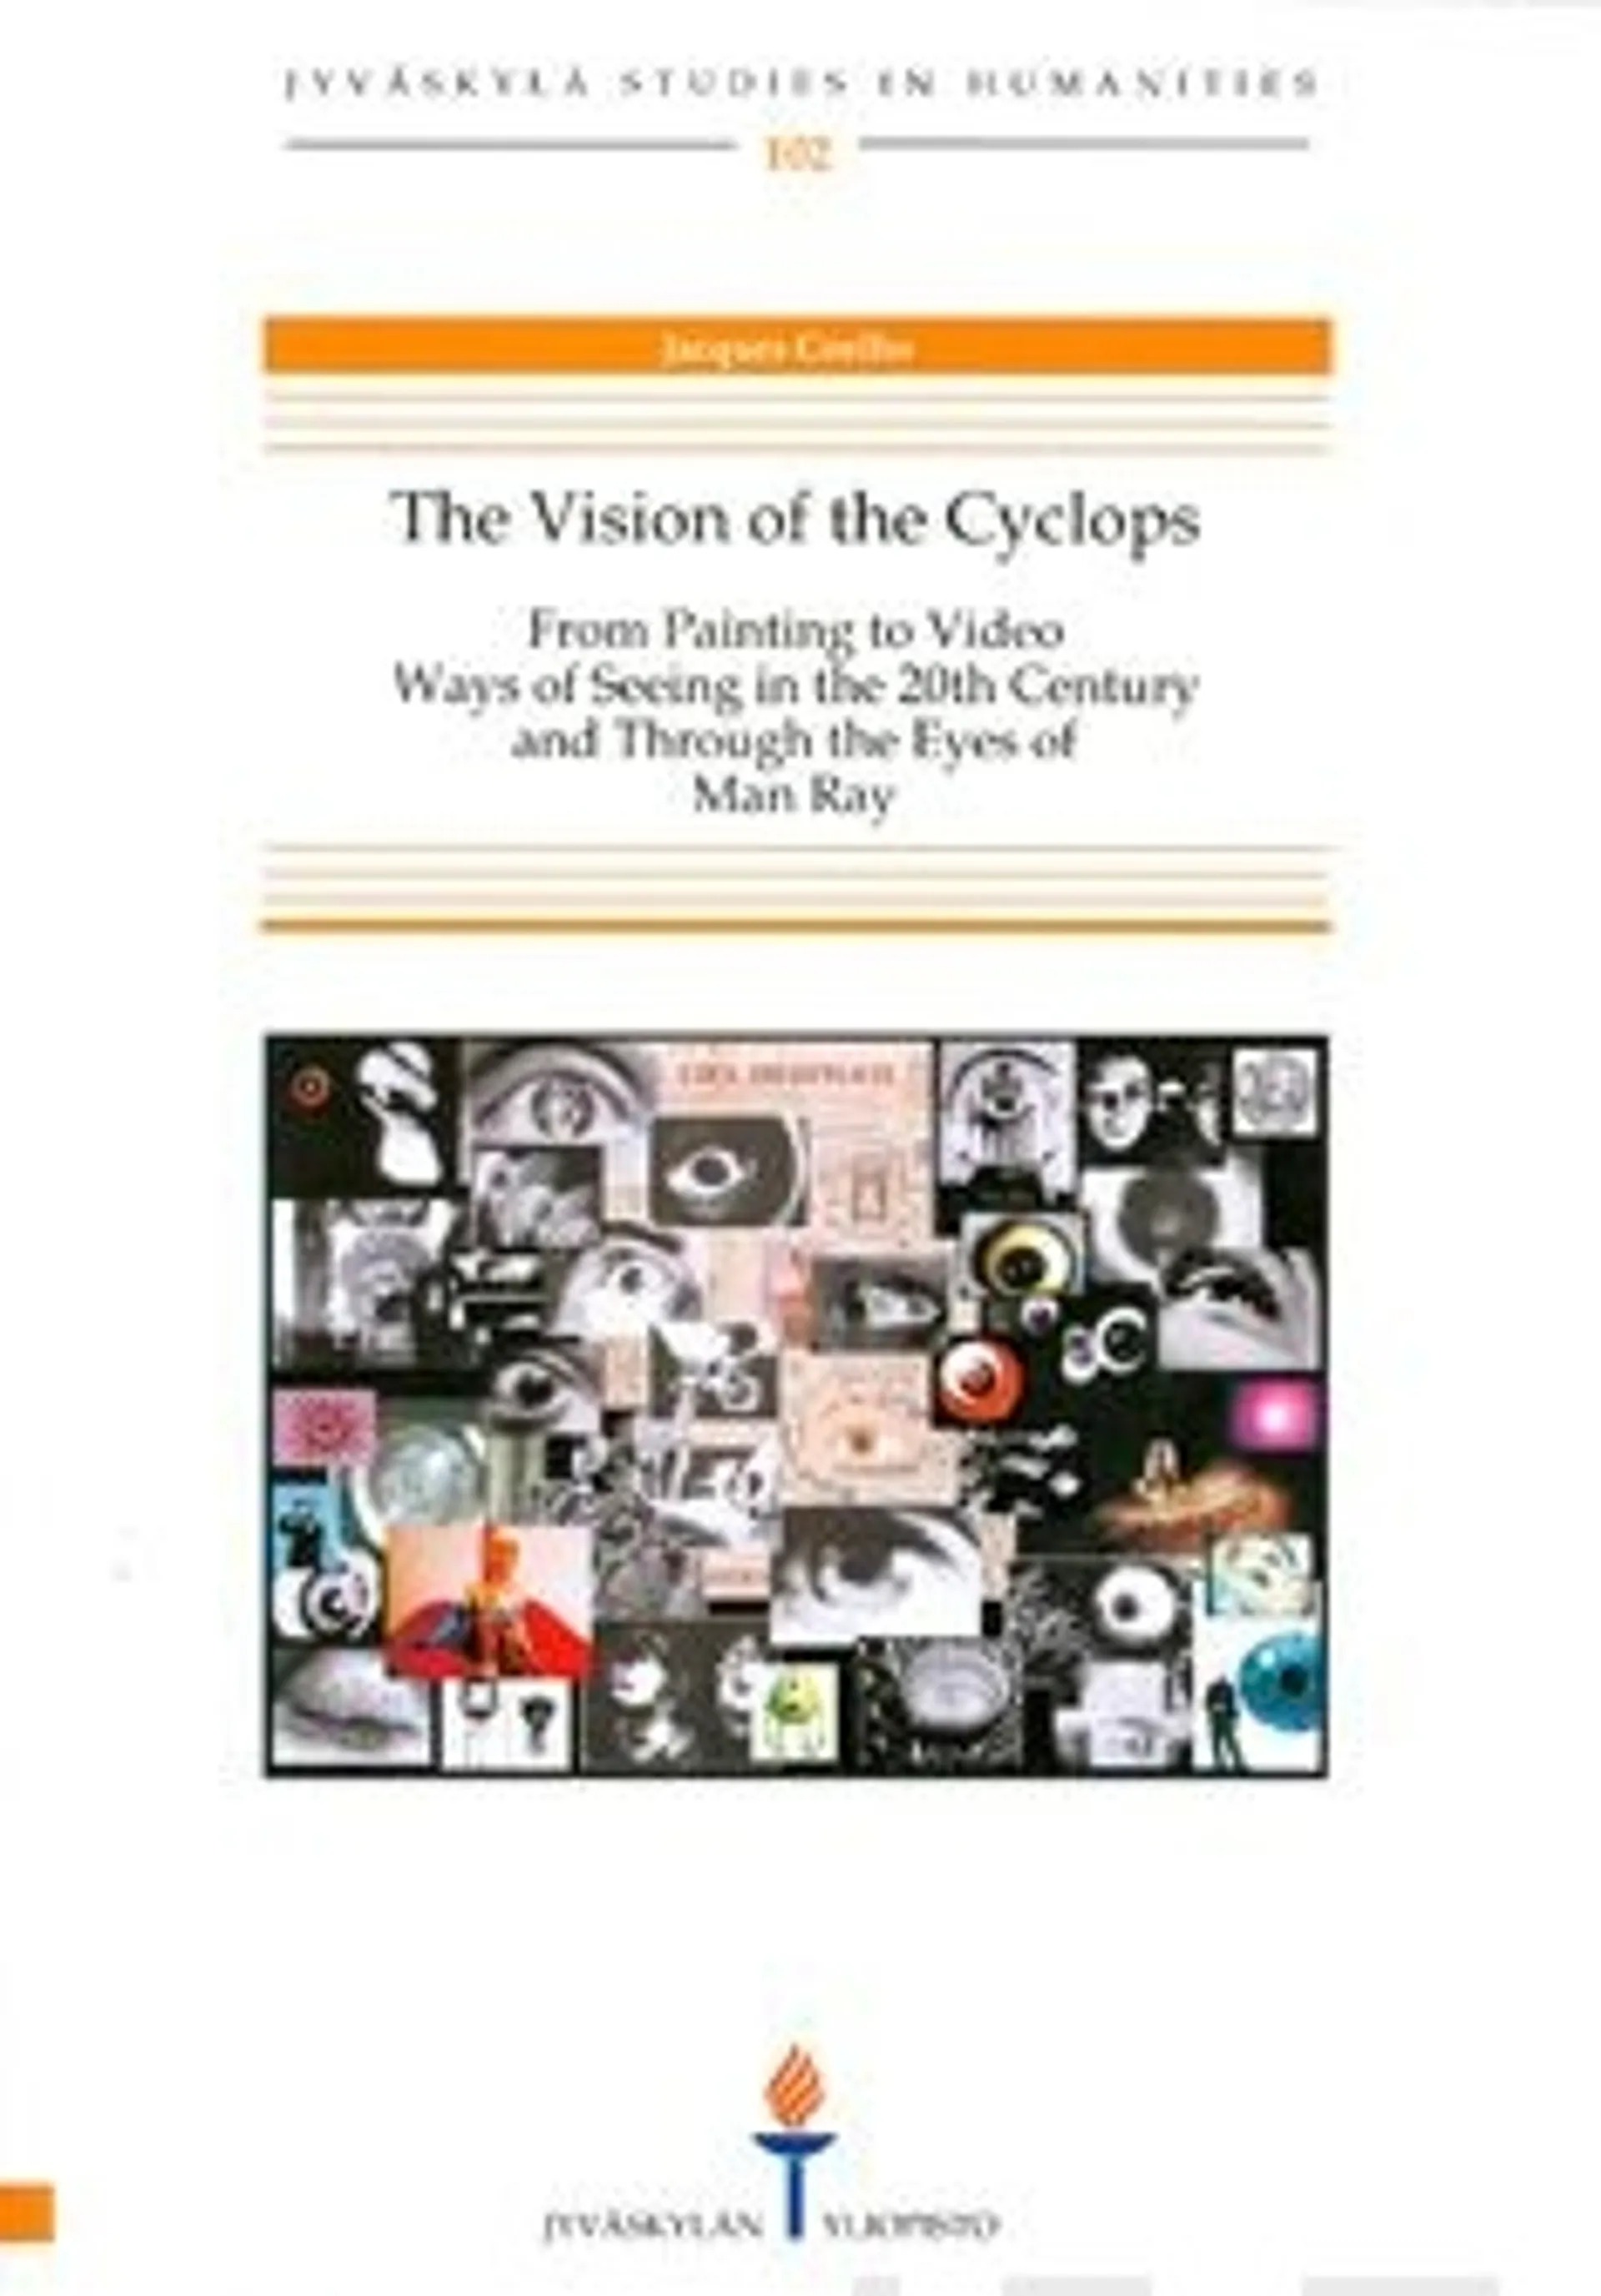 Coelho, The vision of the cyclops